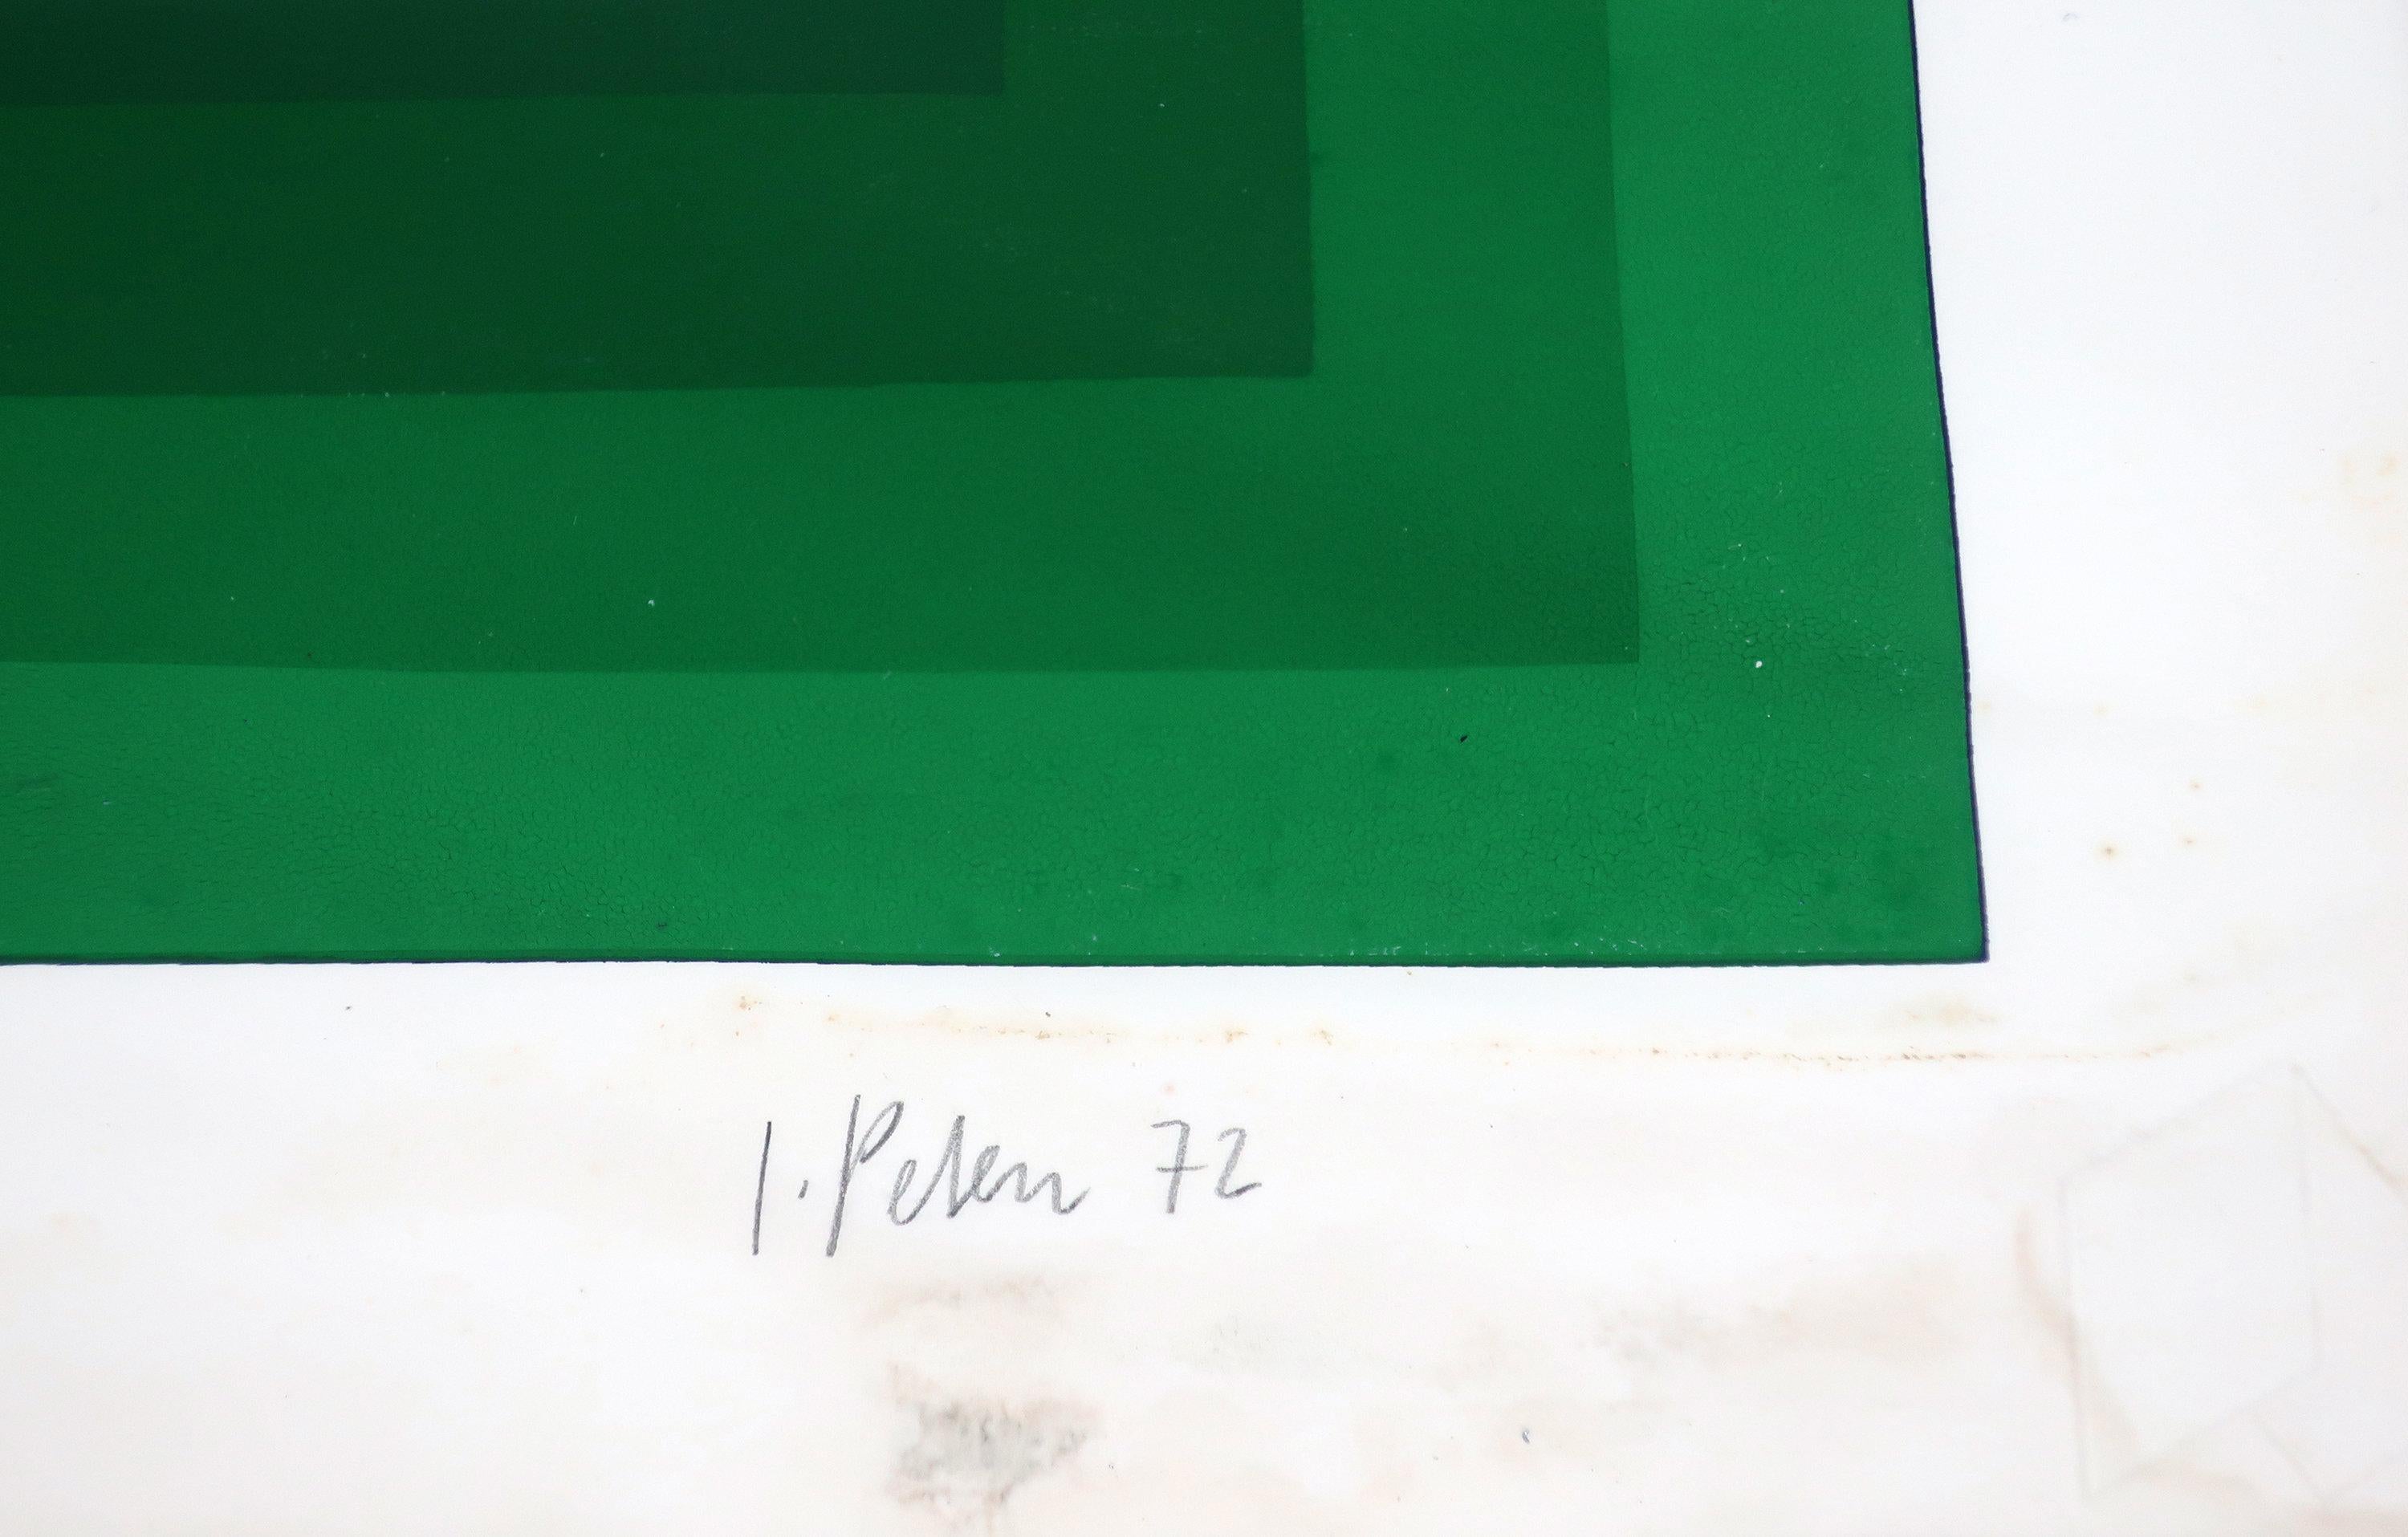 An untitled 1972 op art serigraph by Jurgen Peters in blue and shades of green.  Hand signed and numbered (82/200) in pencil by the artist, with printer’s embossed mark in the lower right hand corner of the paper

An untitled 1972 op art serigraph